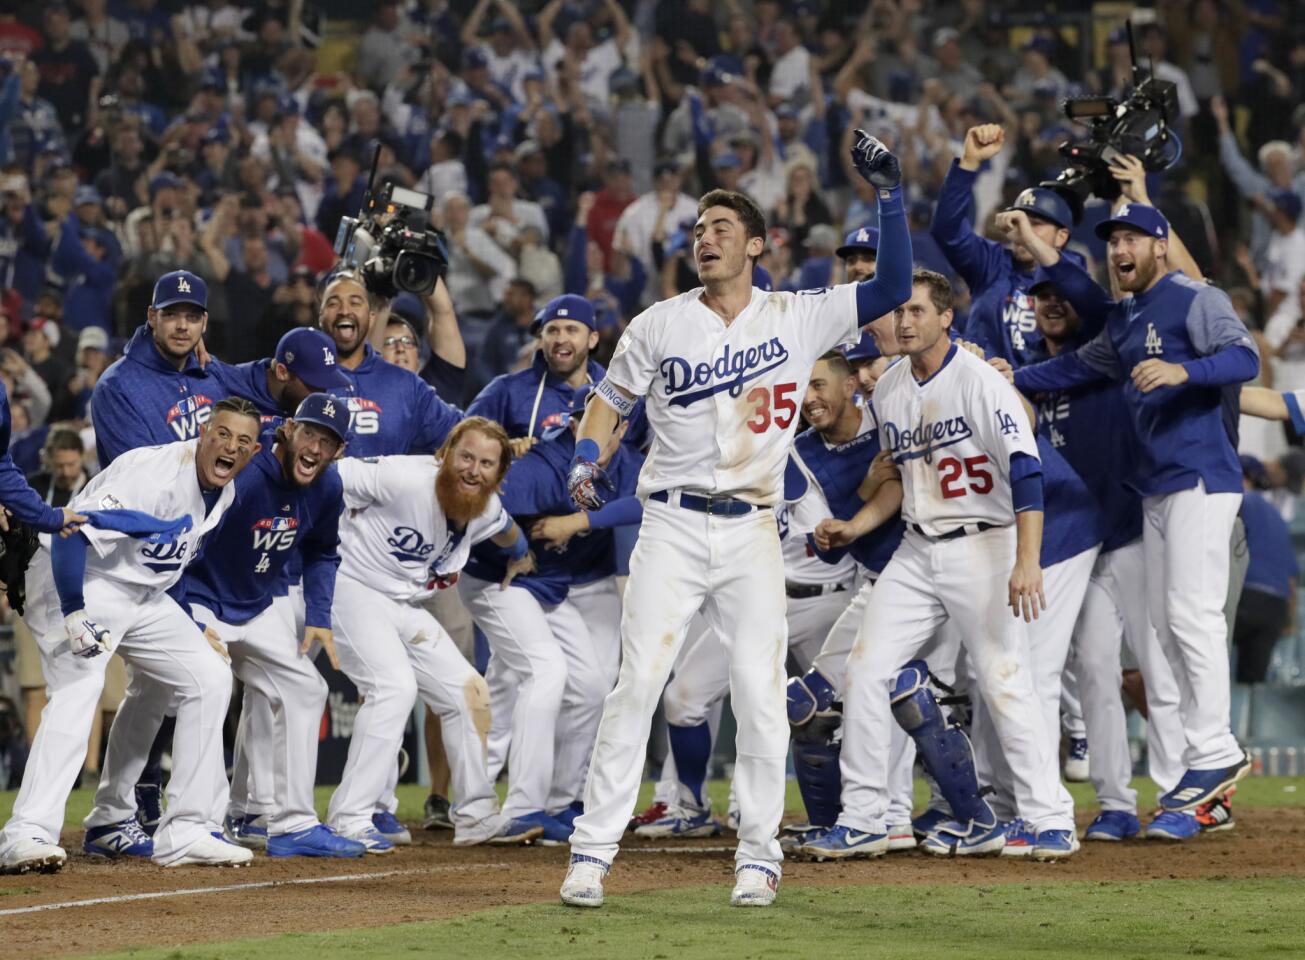 Dodger players including Cody Bellinger wait to greet Max Muncy after hitting the game-winning homerun in the 18th inning against the Red Sox.